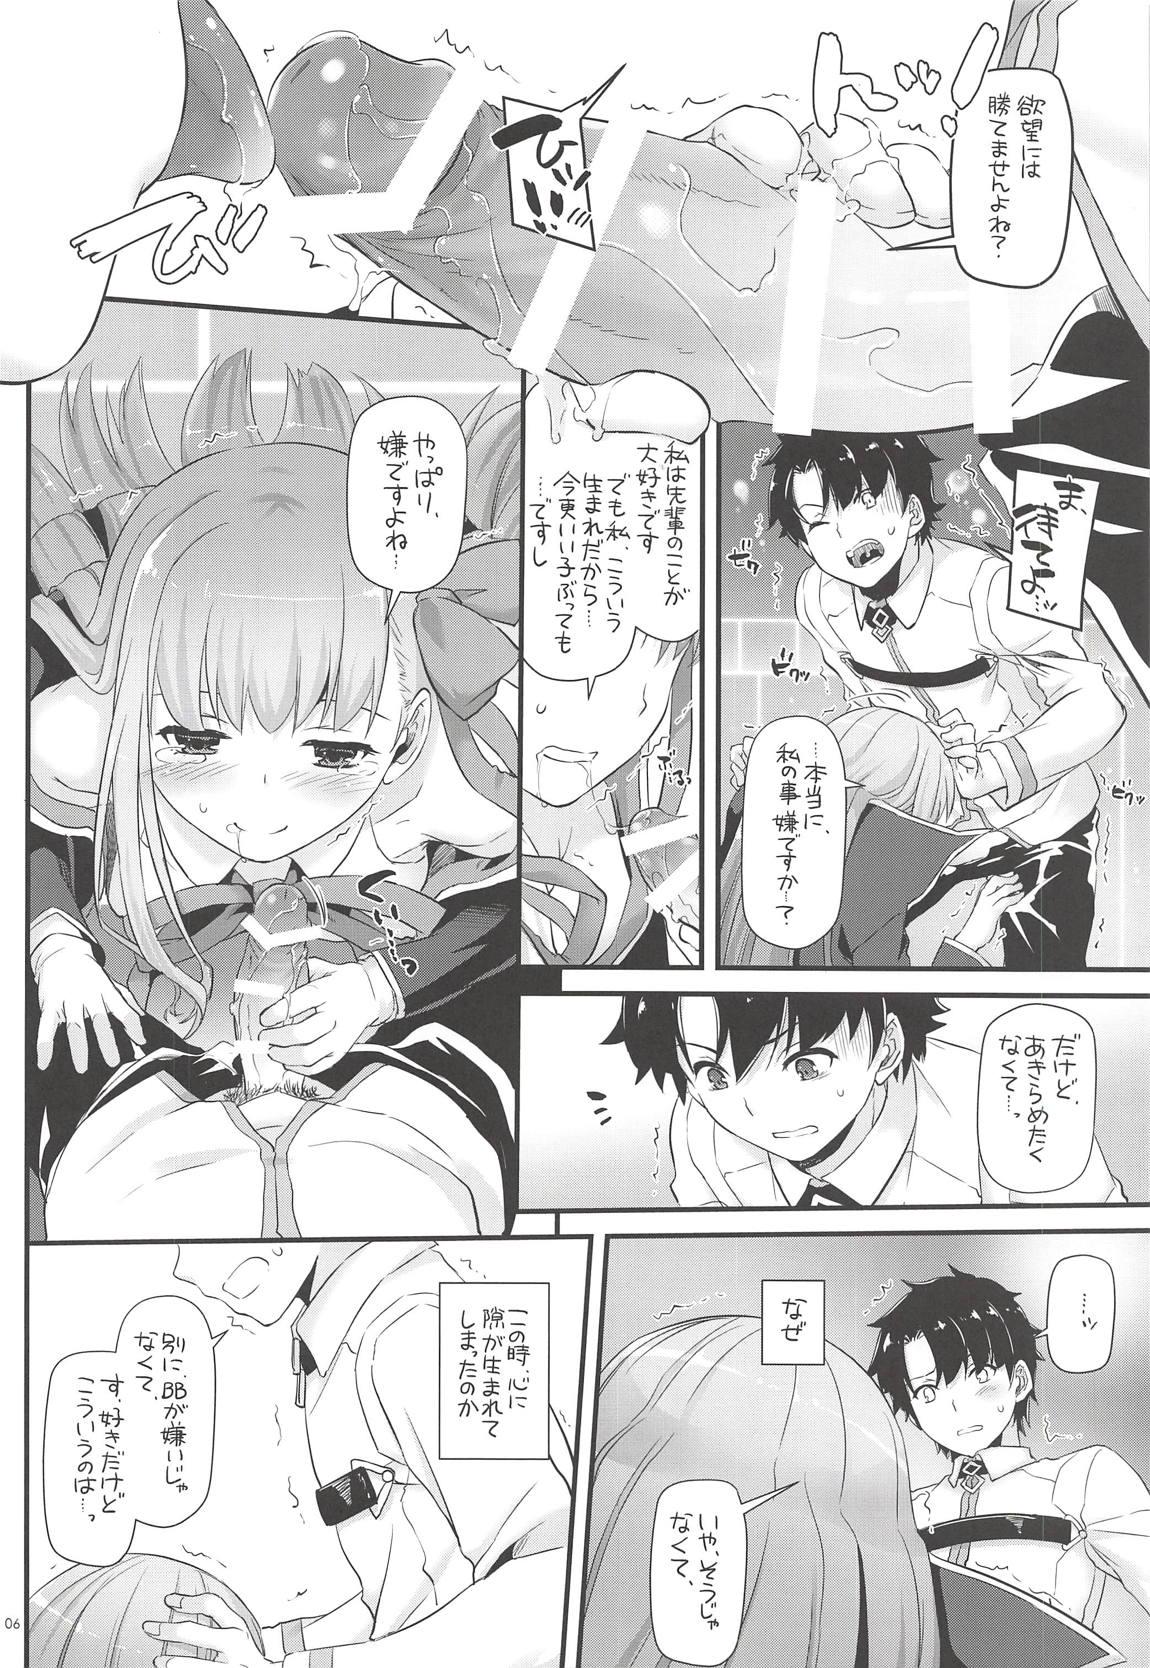 Bra D.L. action 124 - Fate grand order Large - Page 5